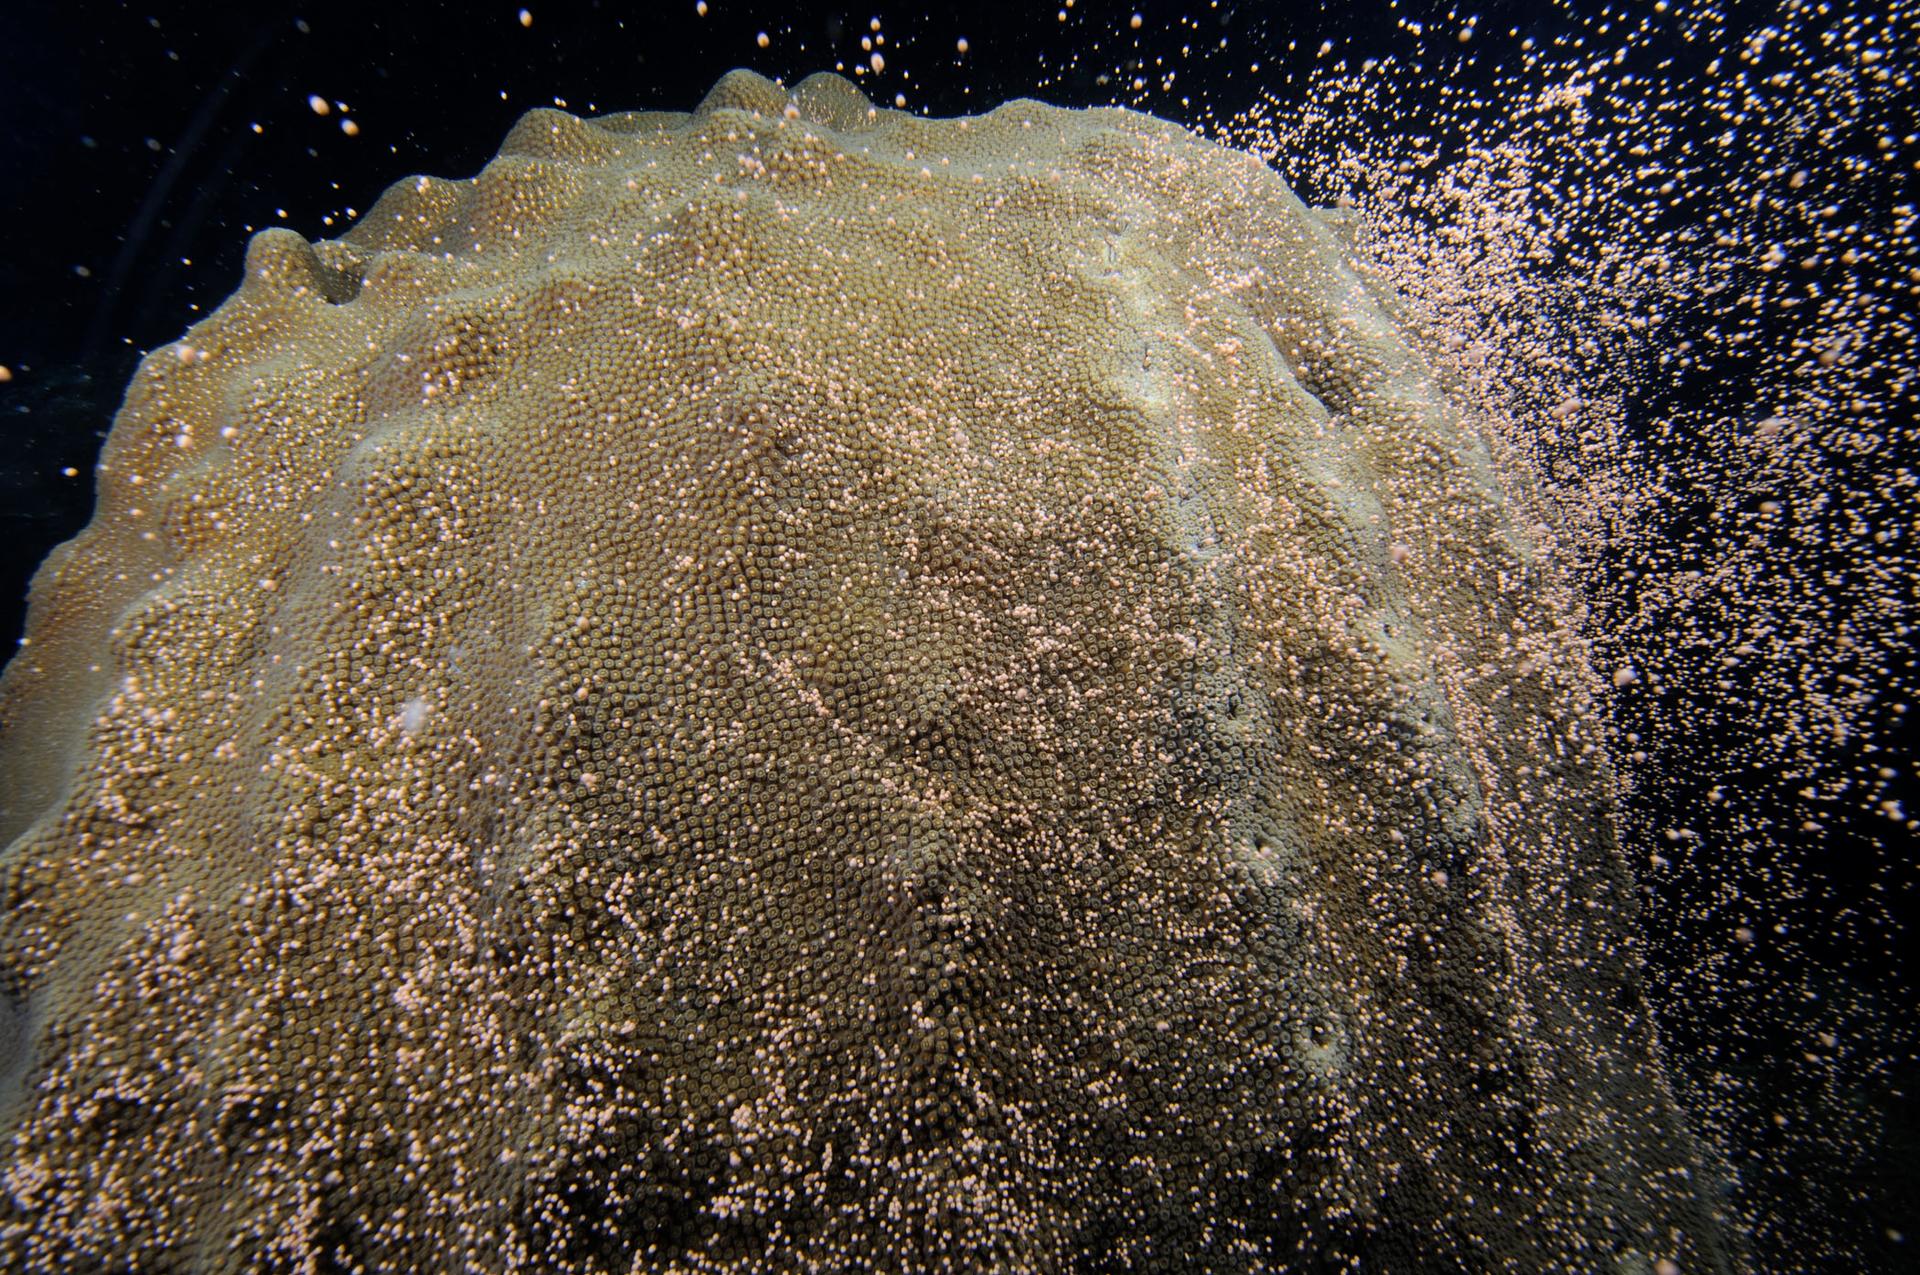 An example of a coral spawning